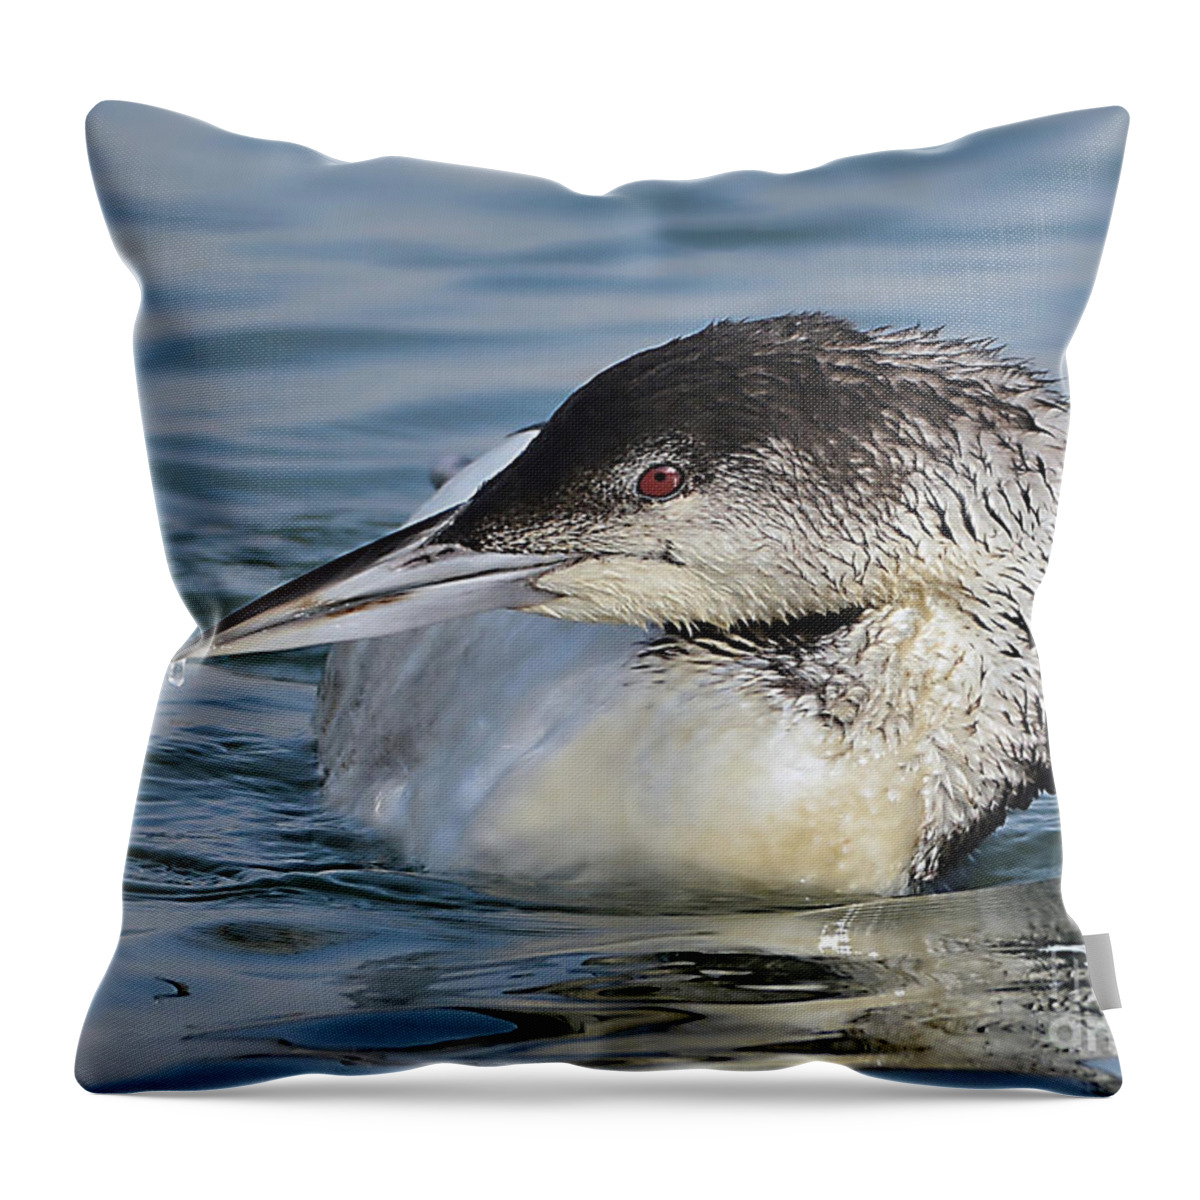 Bird Throw Pillow featuring the photograph Loon by Kathy Baccari